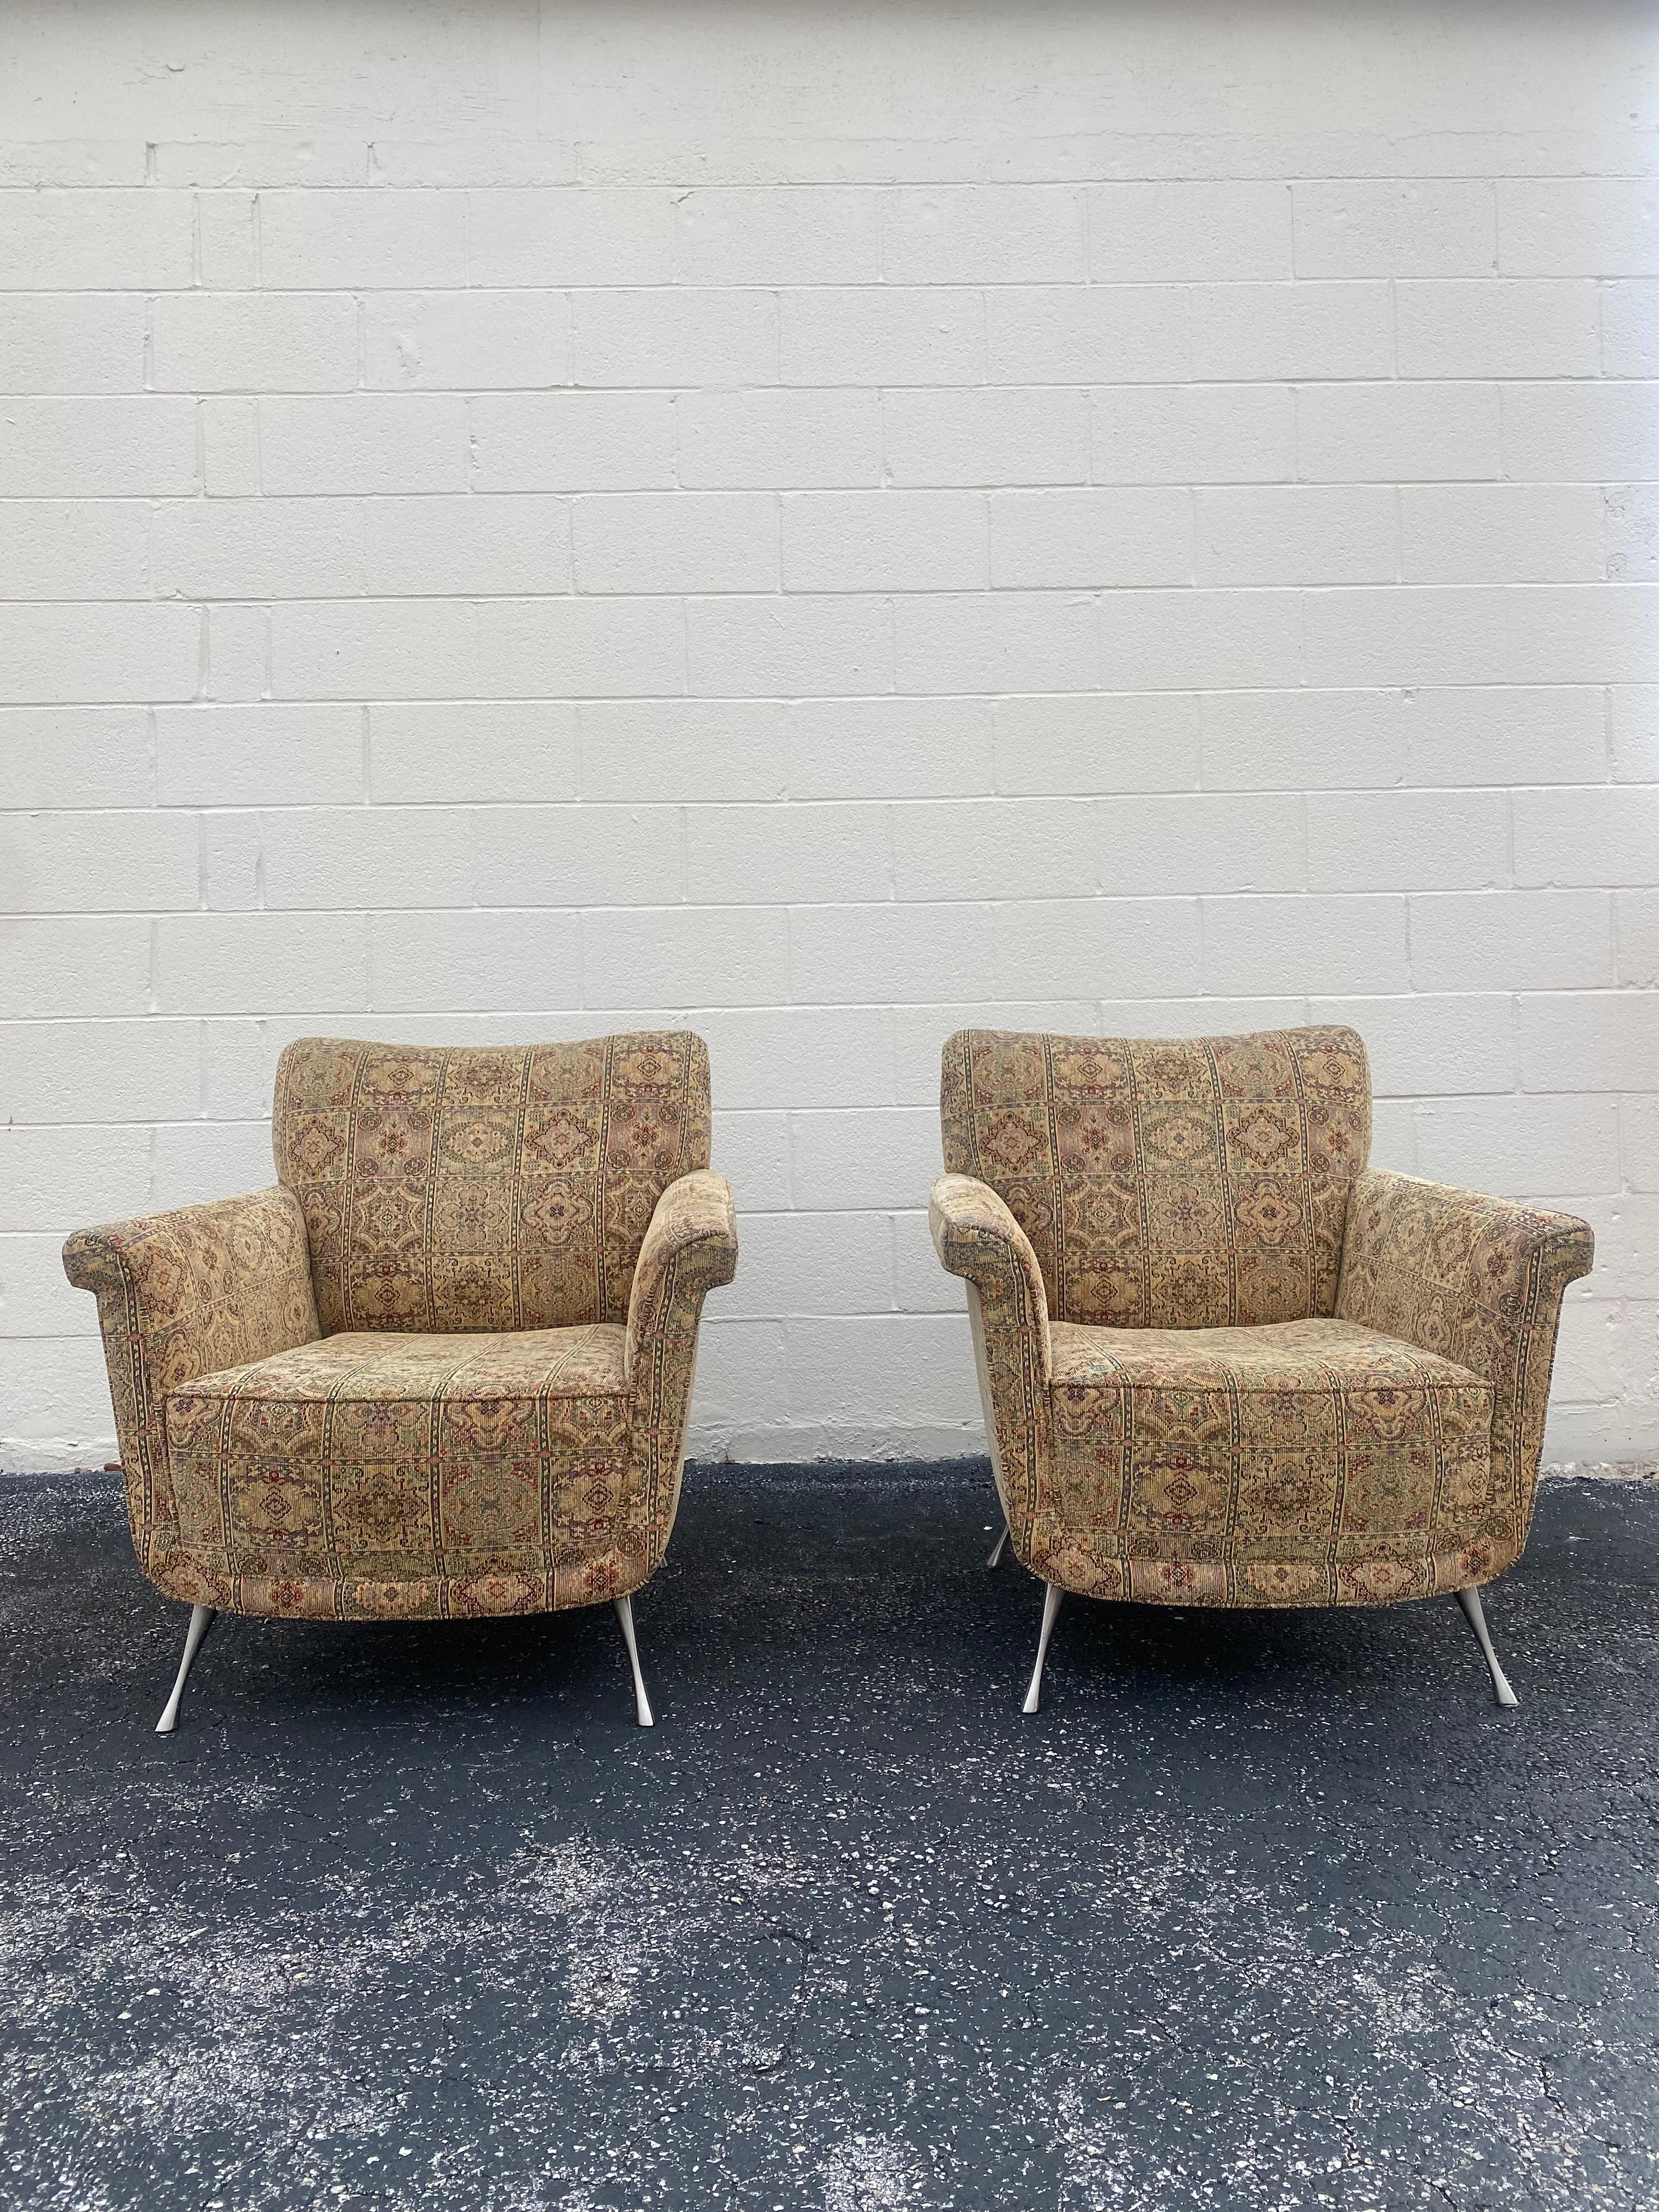 These timeless textile chairs are packed with personality! Outstanding design is exhibited throughout the monumental form. Post modern Chairs are beyond stunning. Sits on a metal pin legs. The sculptural shape also feature a comfortable sculpted